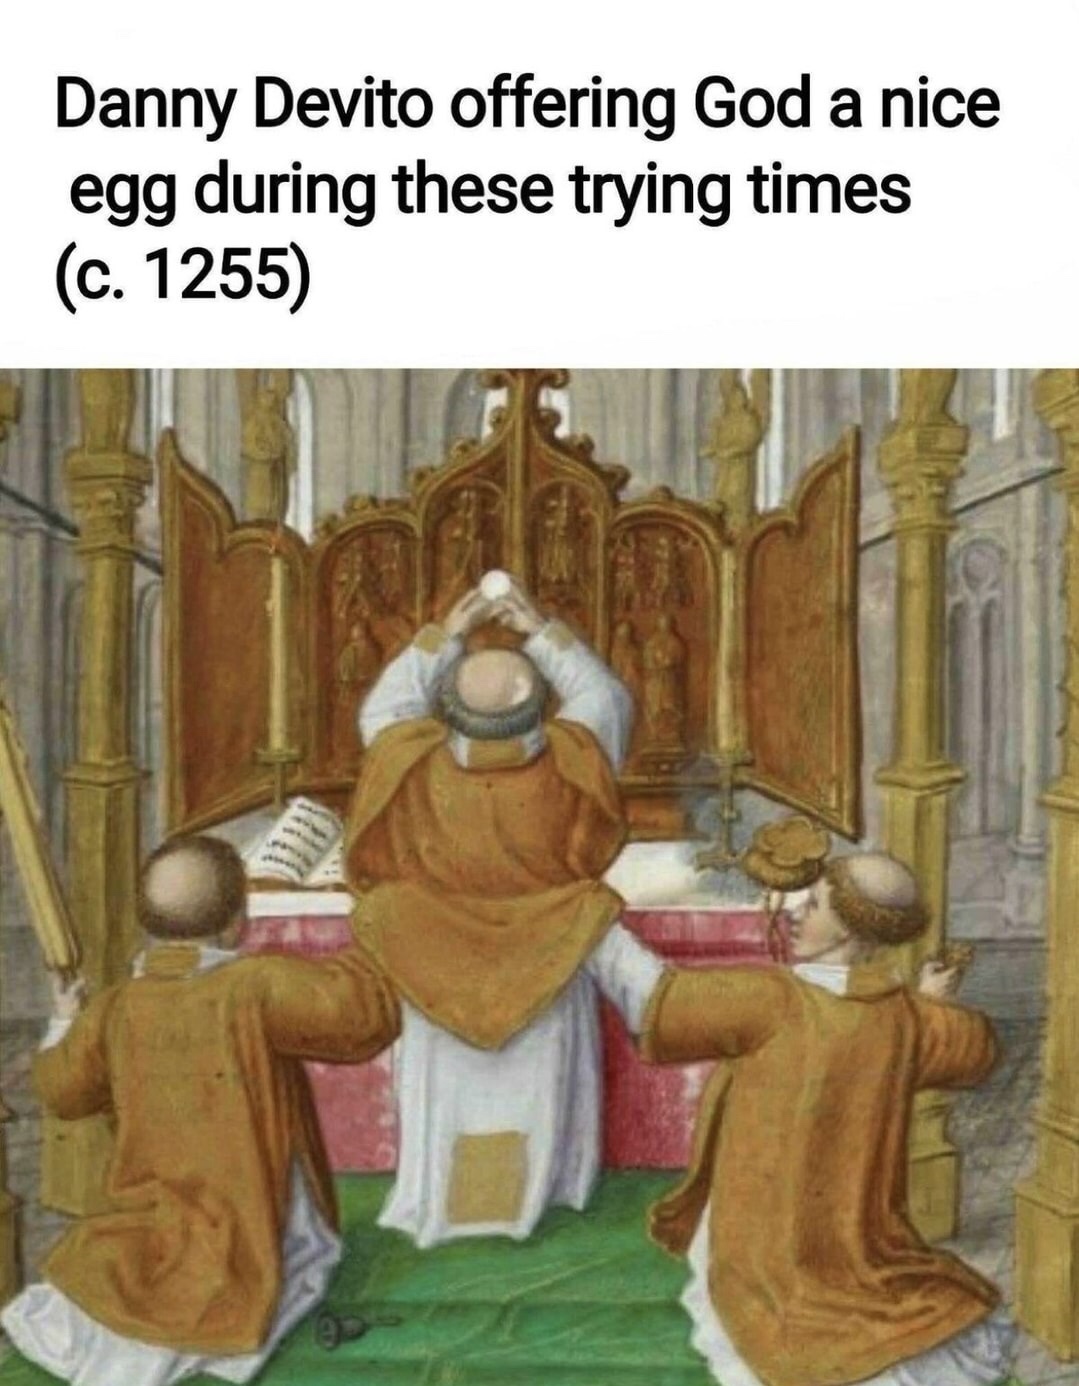 danny devito memes - Danny Devito offering God a nice egg during these trying times c. 1255